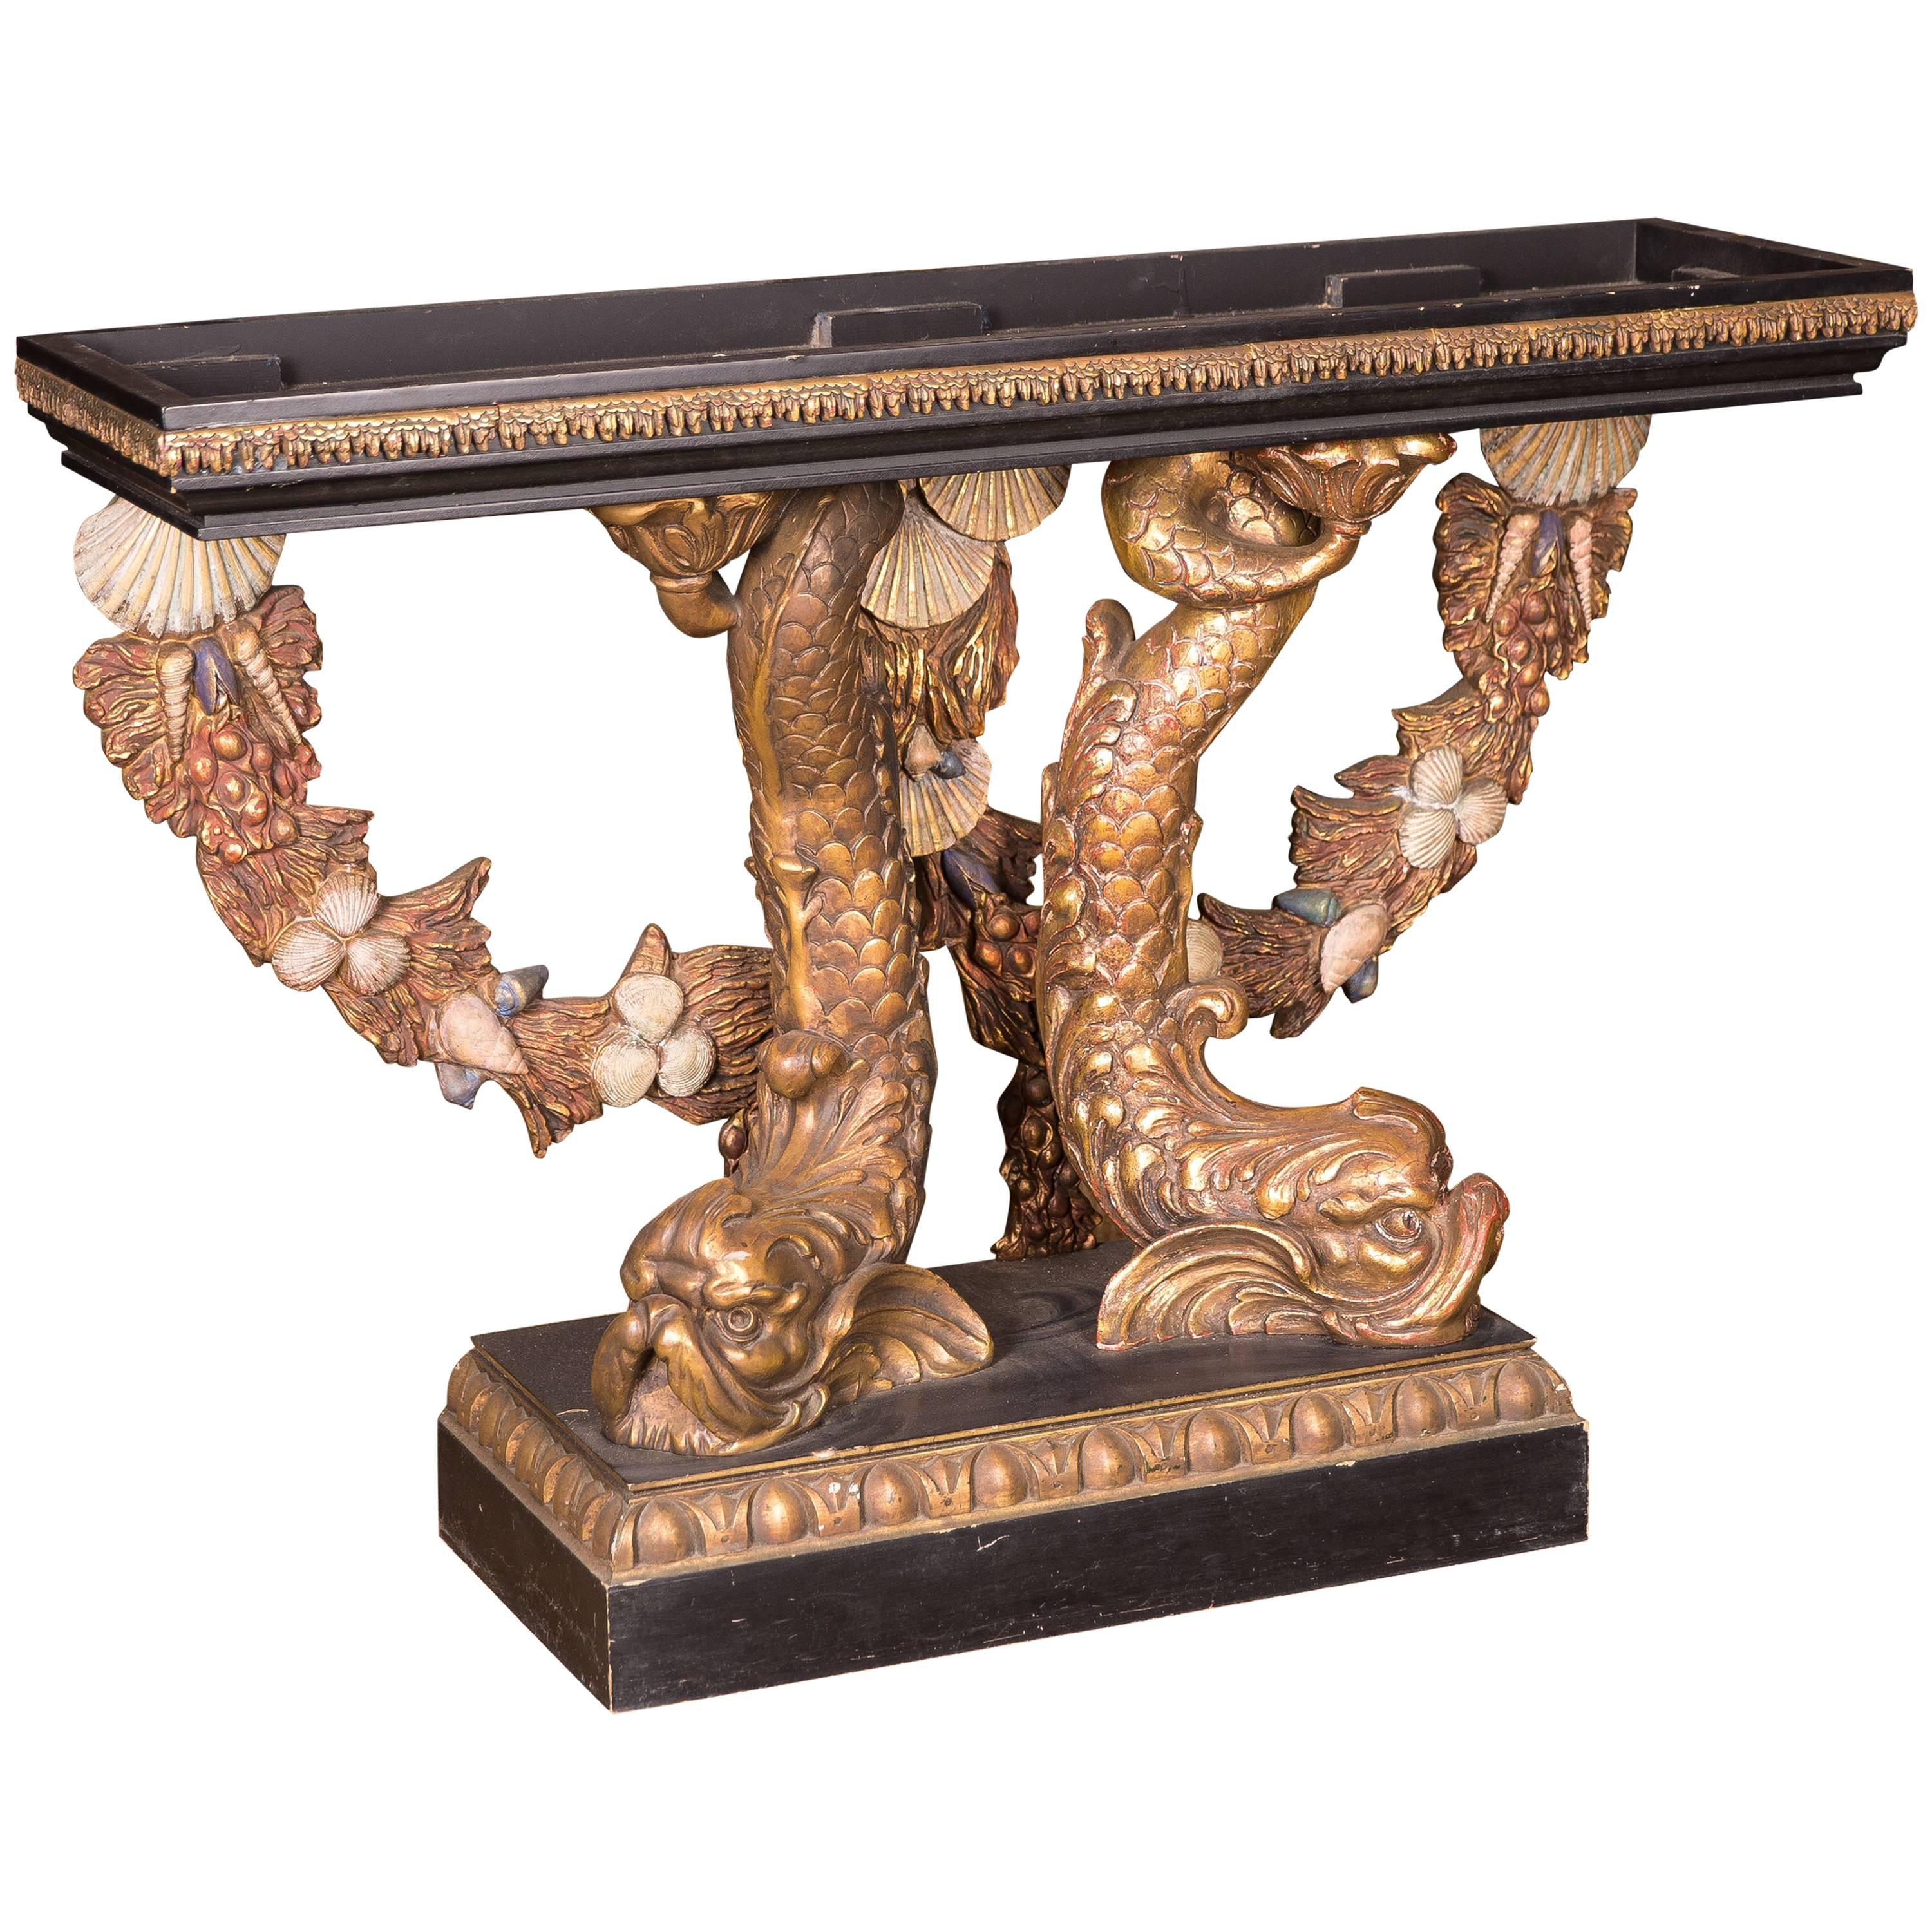 Highly Detailed Stately Console Table with Dolphins in Empire Style